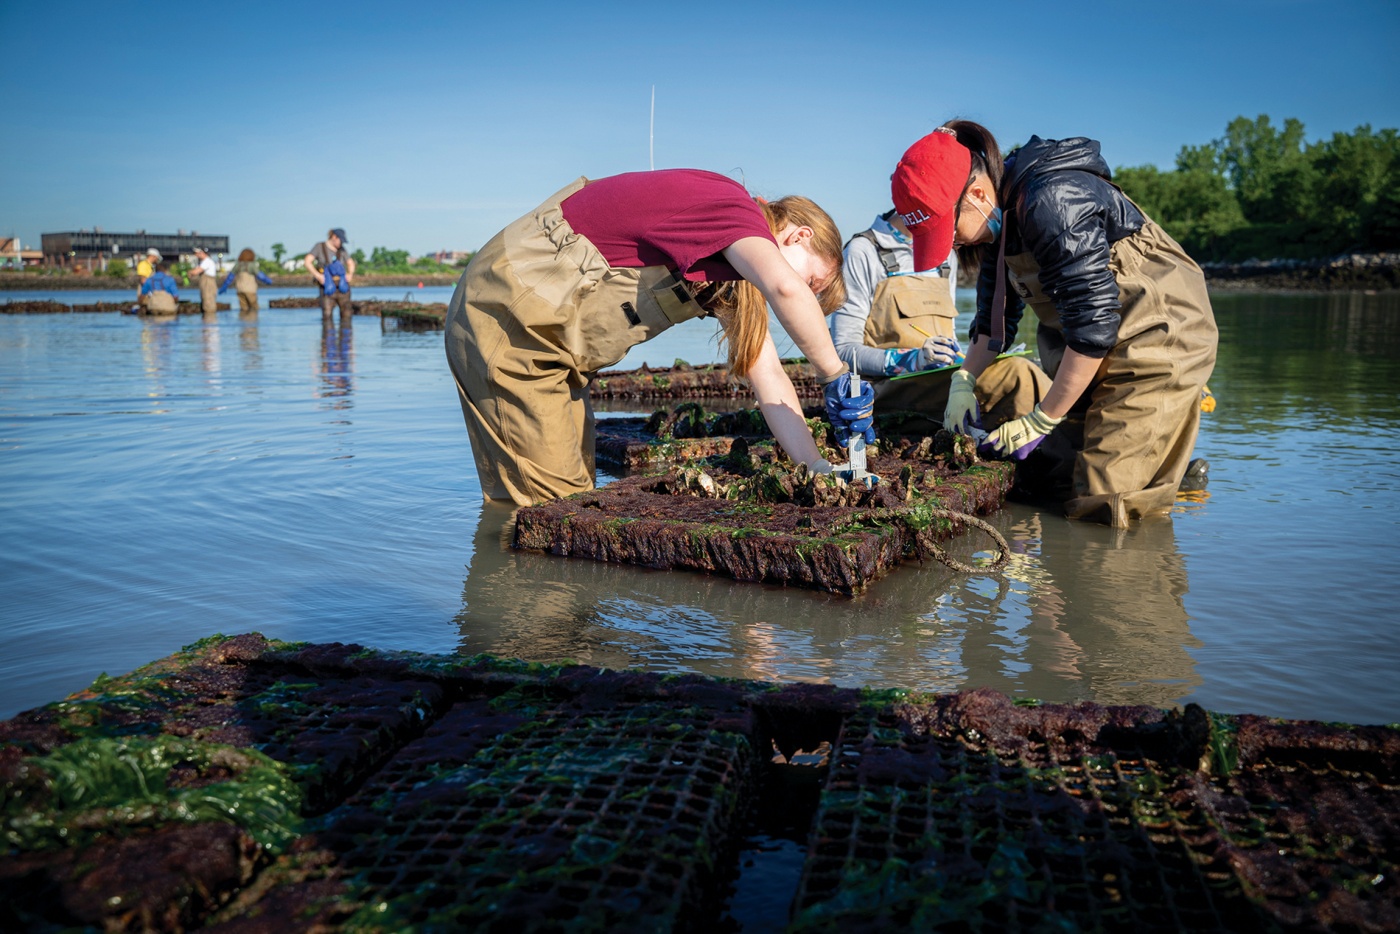 Image of two people knee-deep in water harvesting oysters with an oyster cage in the foreground.